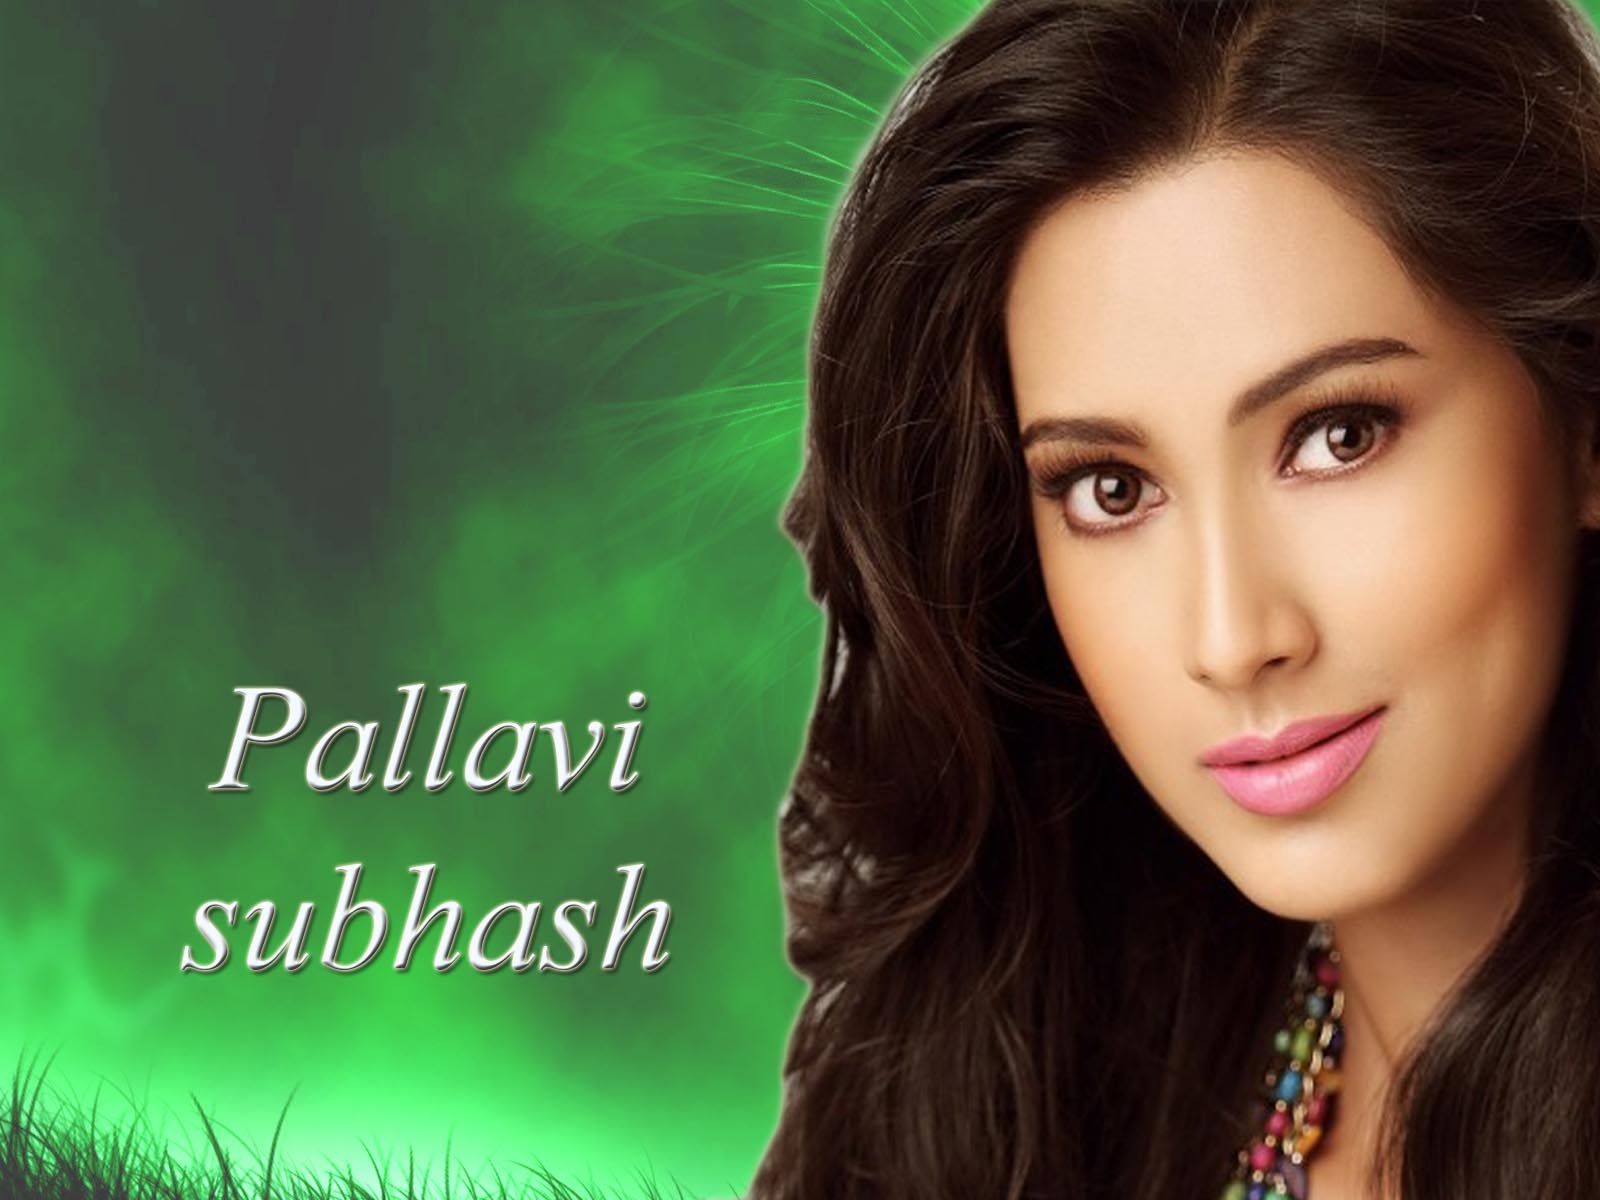 1st Name All On People Named Pallavi Songs Books Gift Ideas Pics